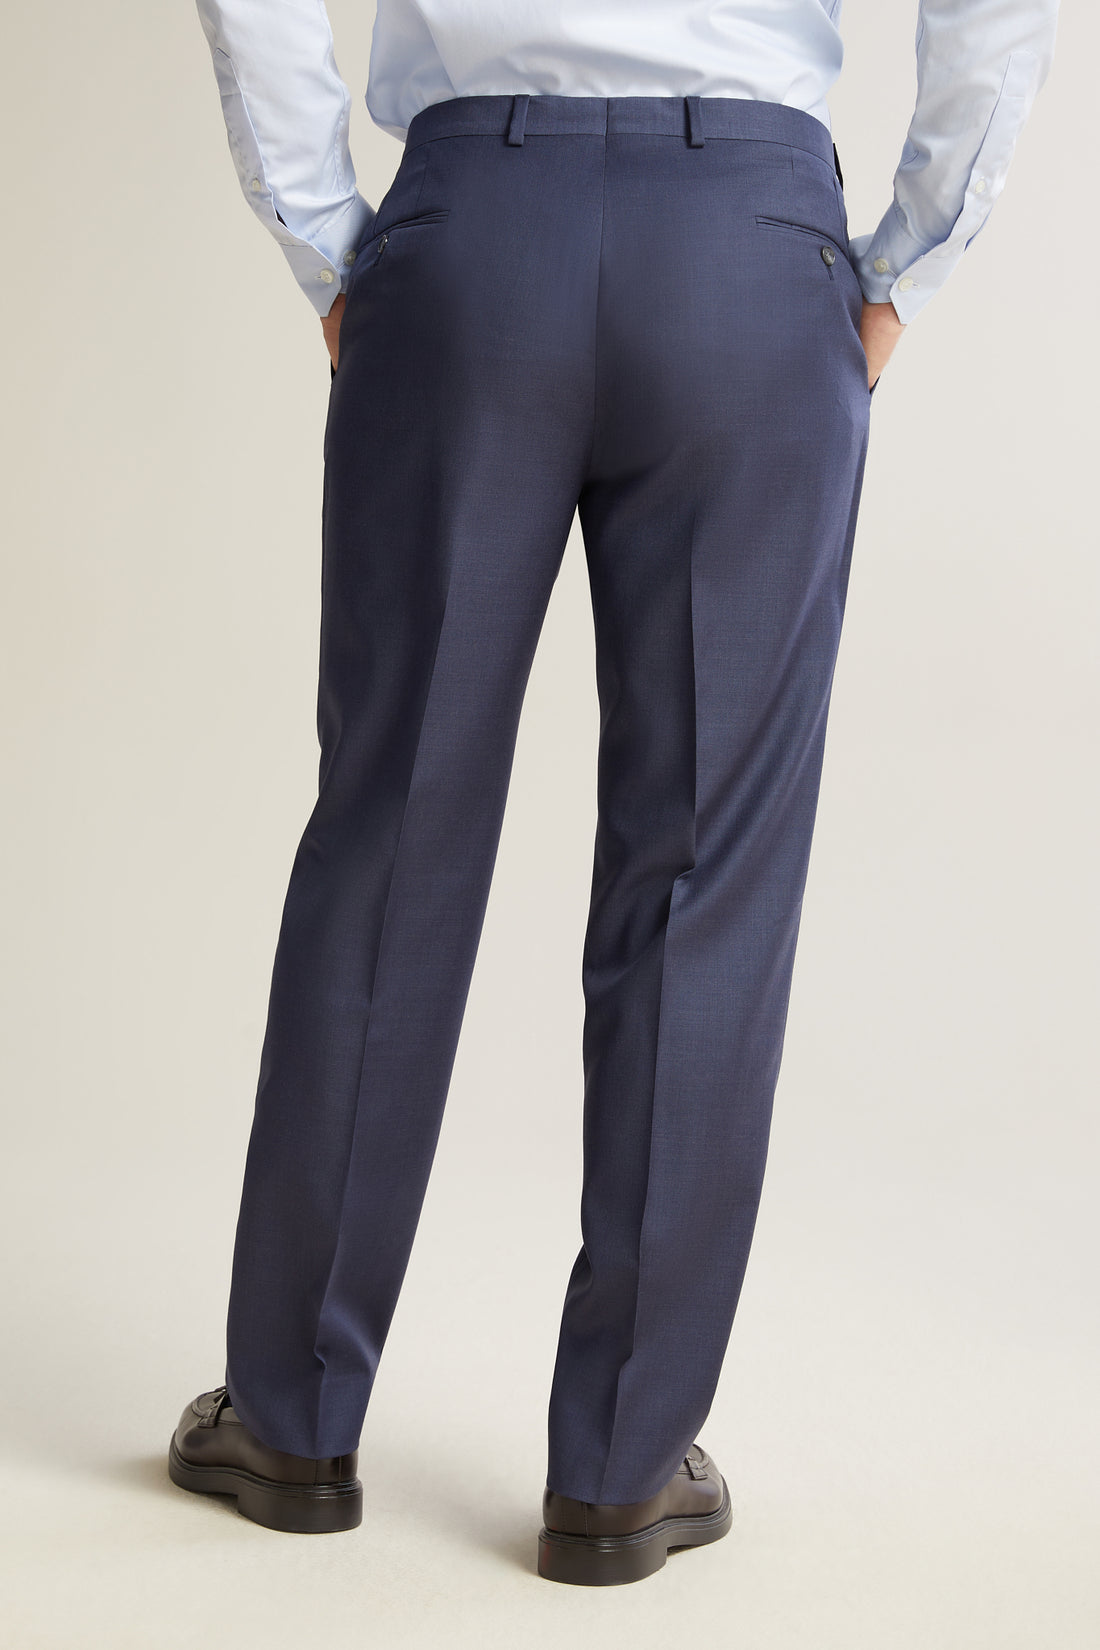 Blue donegal tweed flat-front Dress Pants